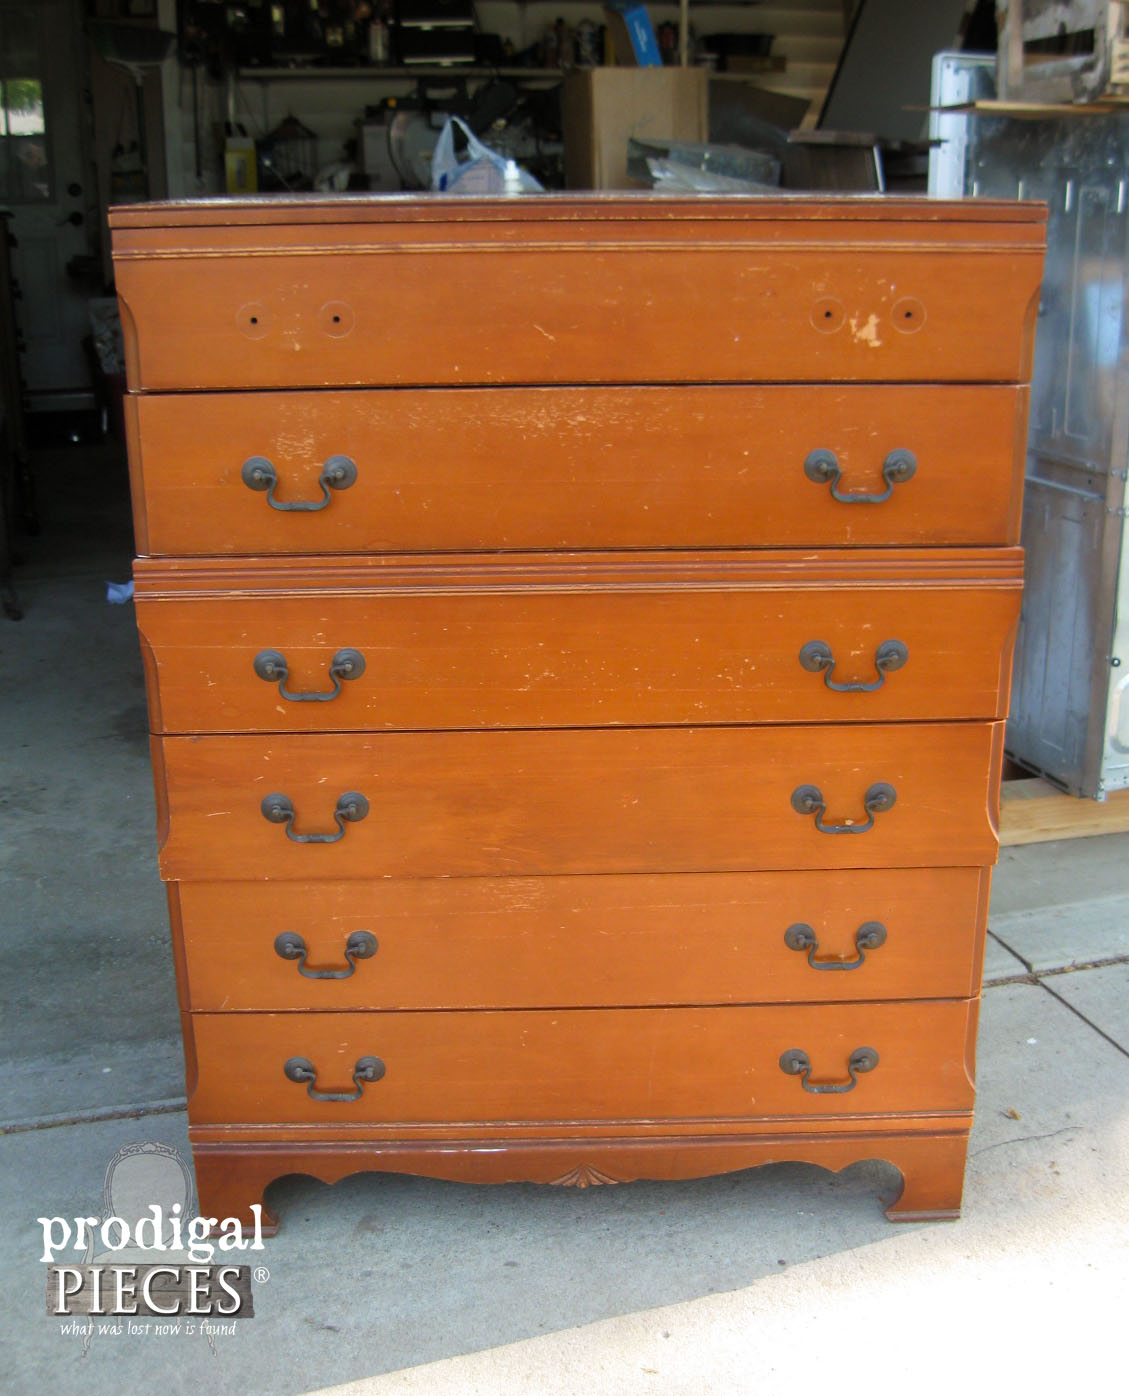 Vintage Mengel Chest of Drawers Before Makeover by Prodigal Pieces | www.prodigalpieces.com